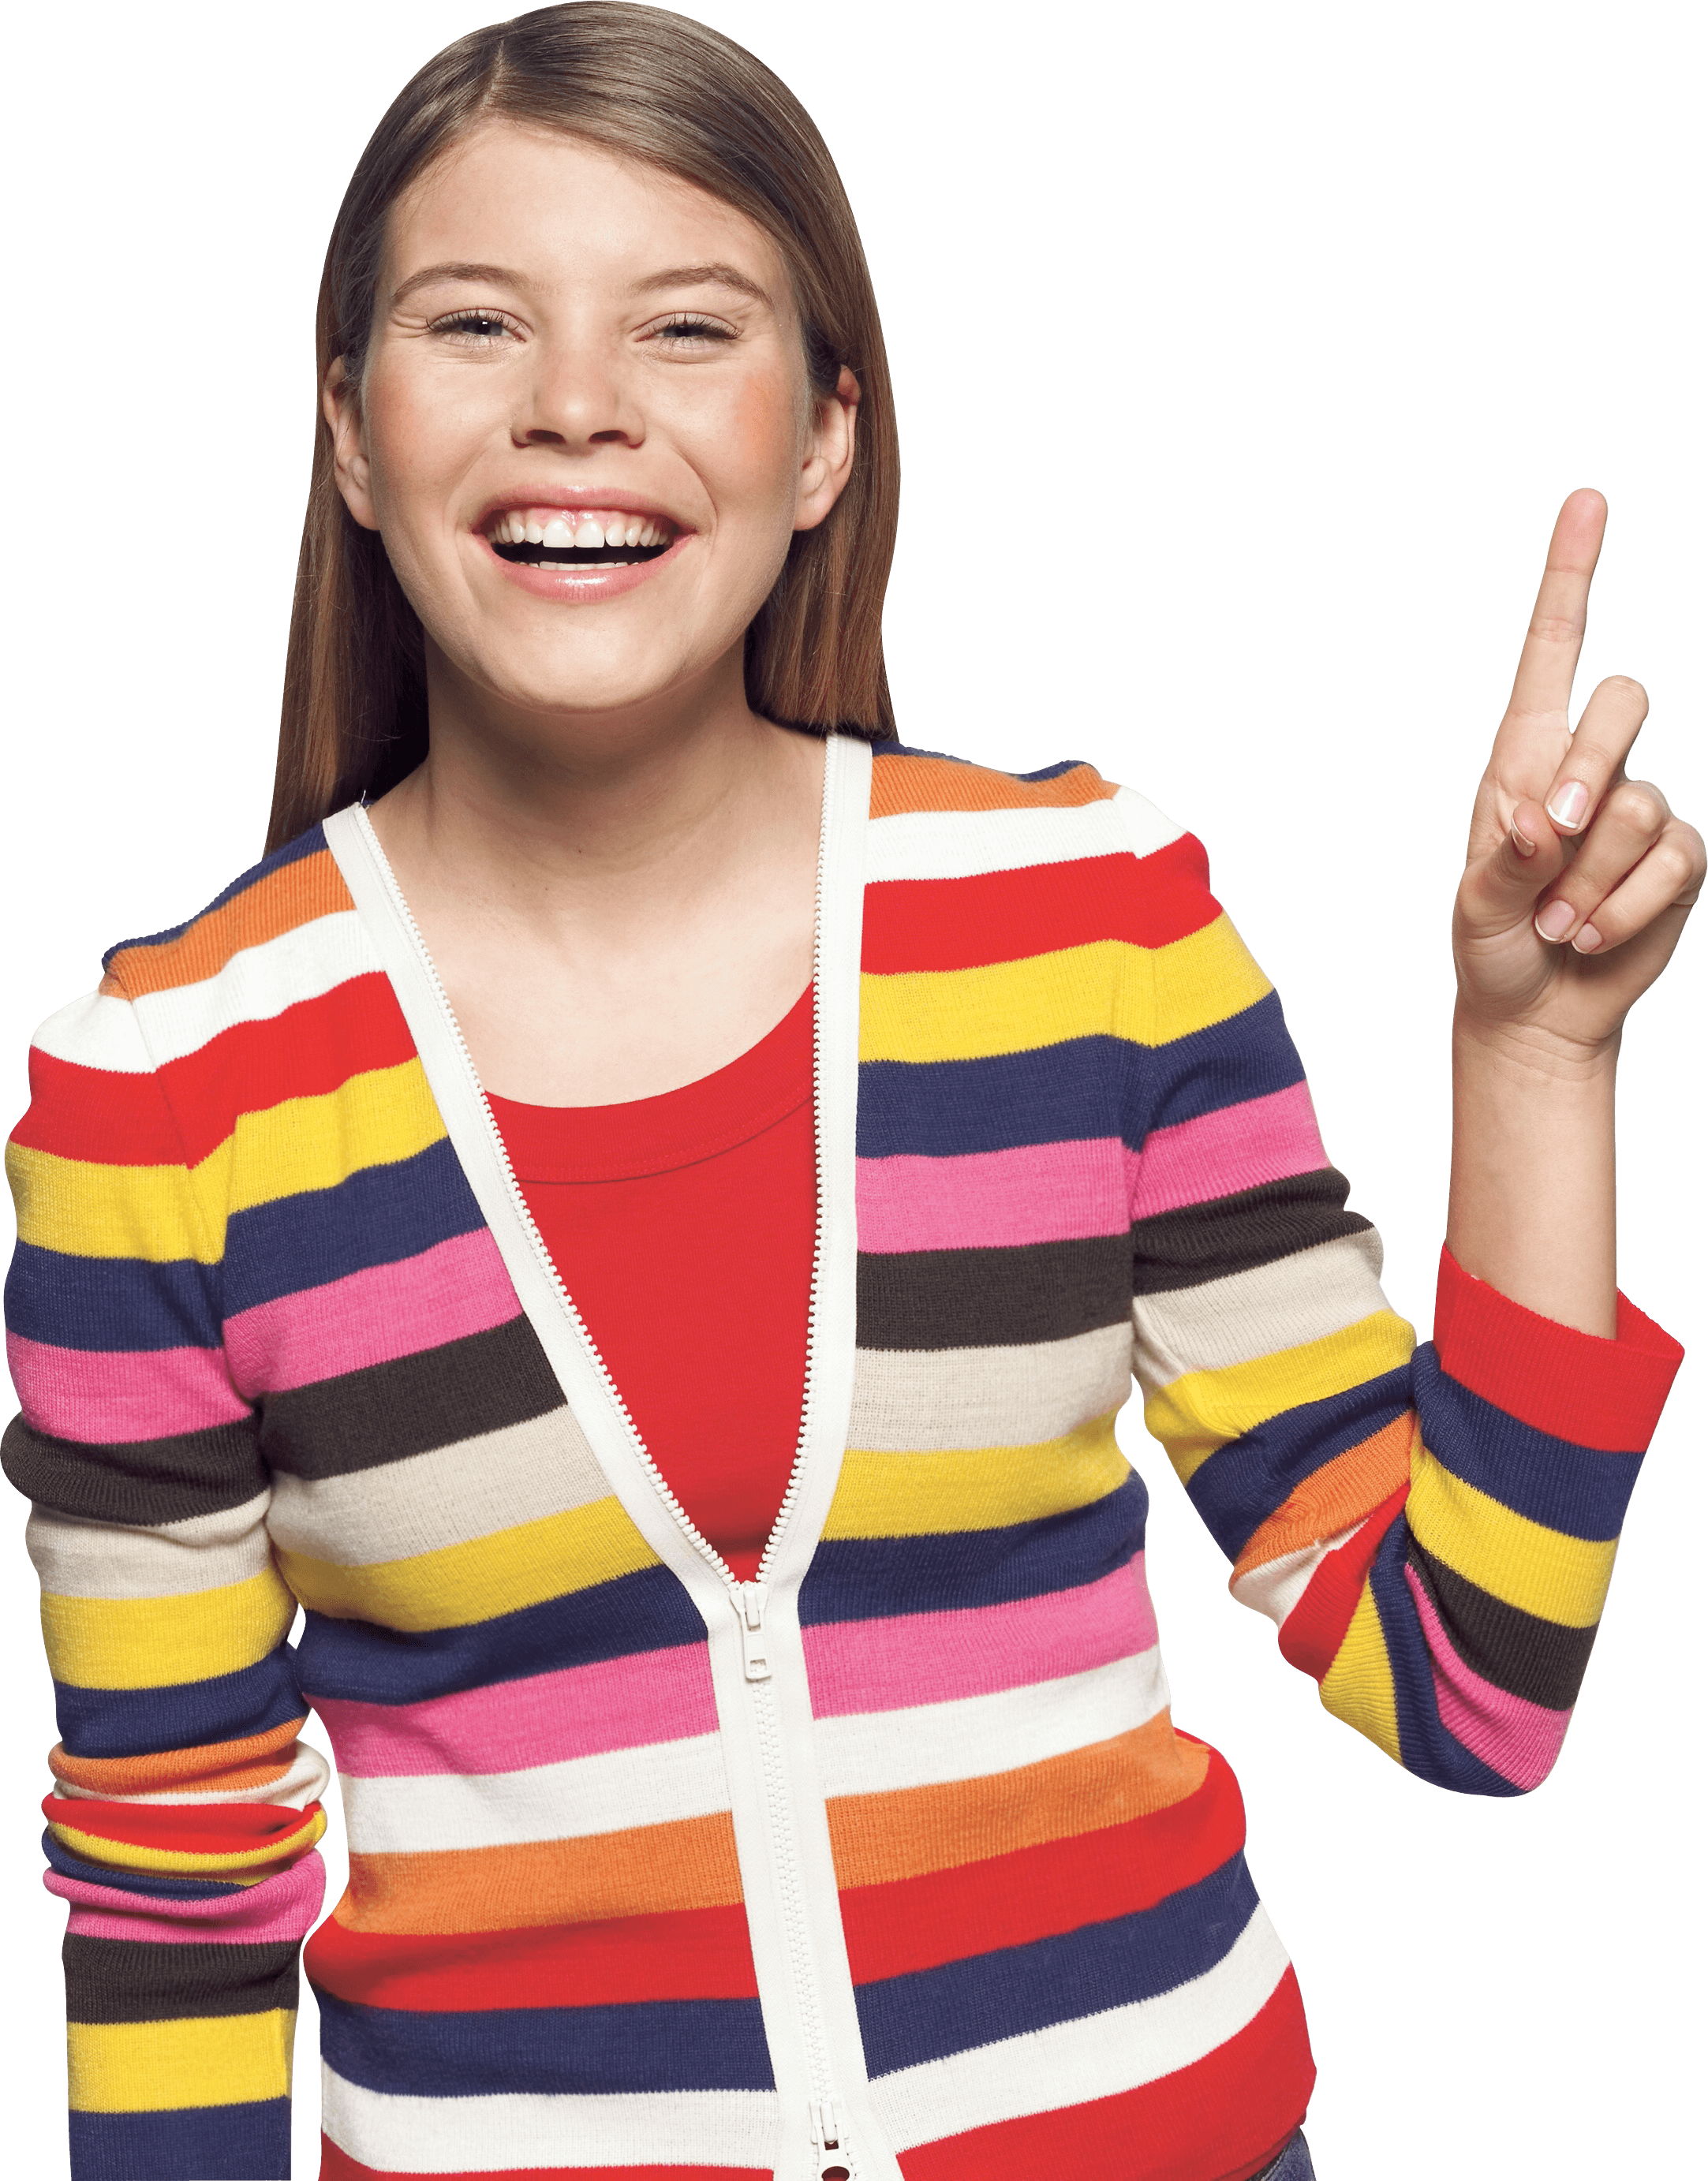 Top Girls Png Images - Girl, Transparent background PNG HD thumbnail